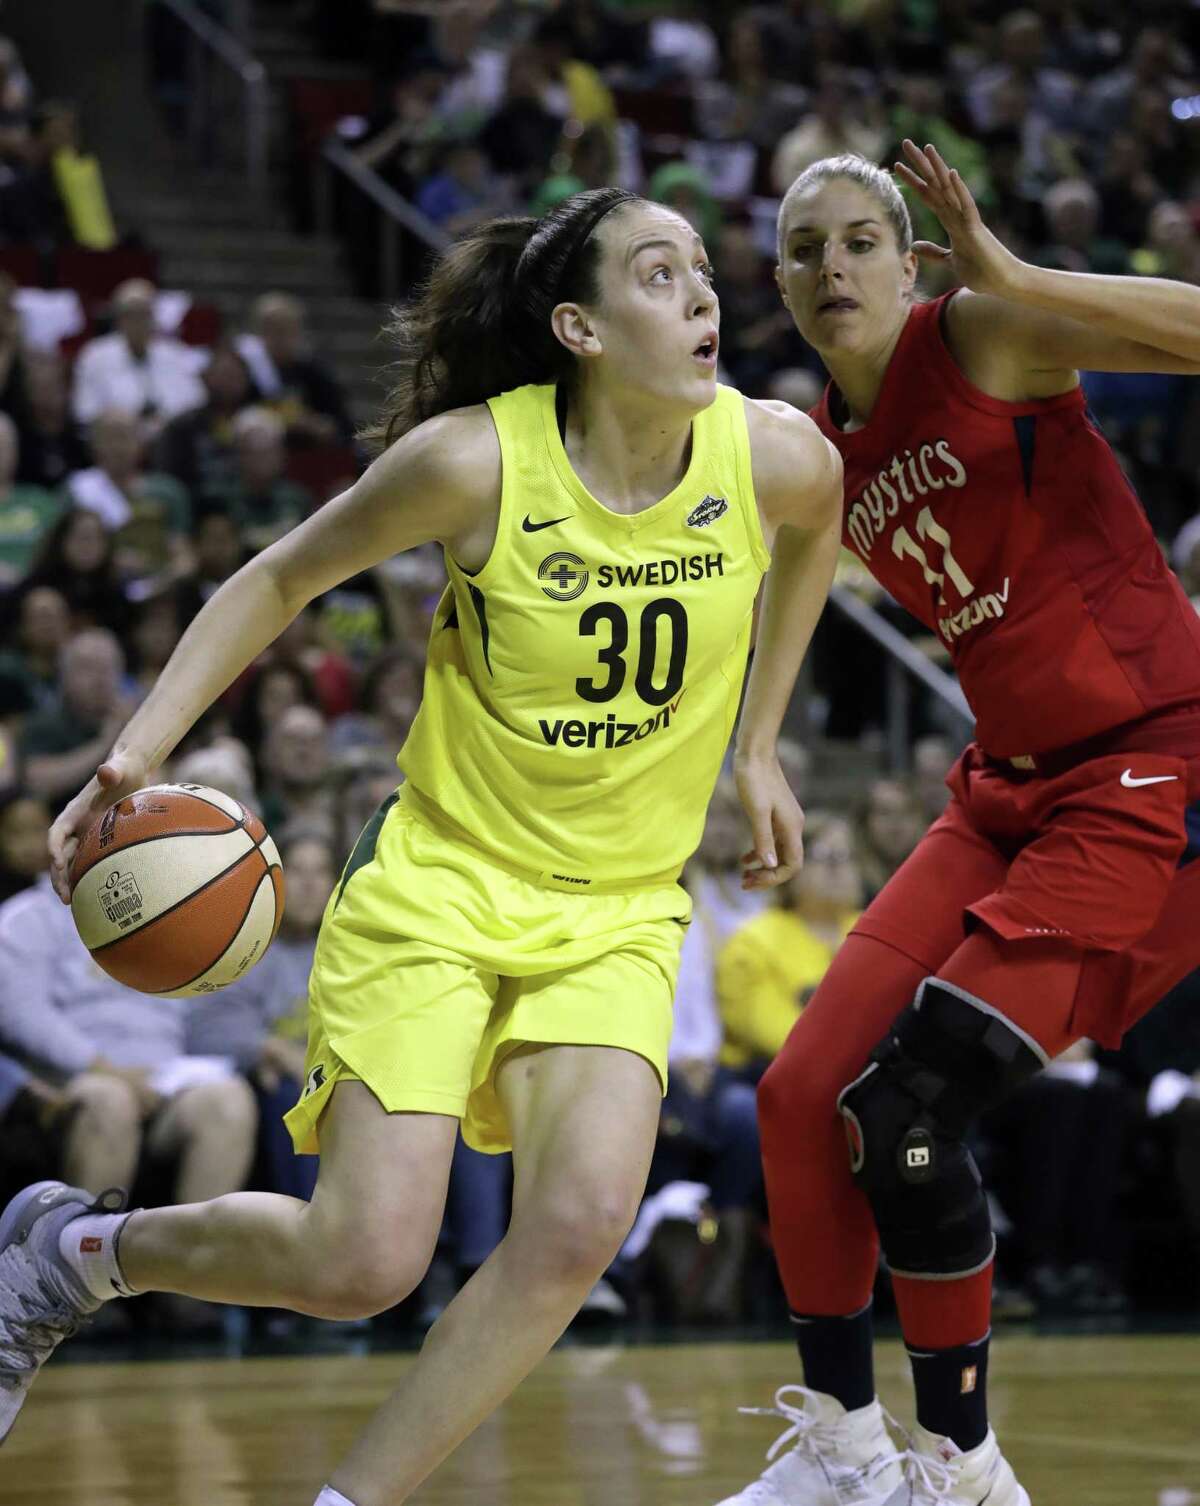 Reigning WNBA MVP Breanna Stewart is expected to miss the upcoming season after rupturing the Achilles’ tendon in her right leg.